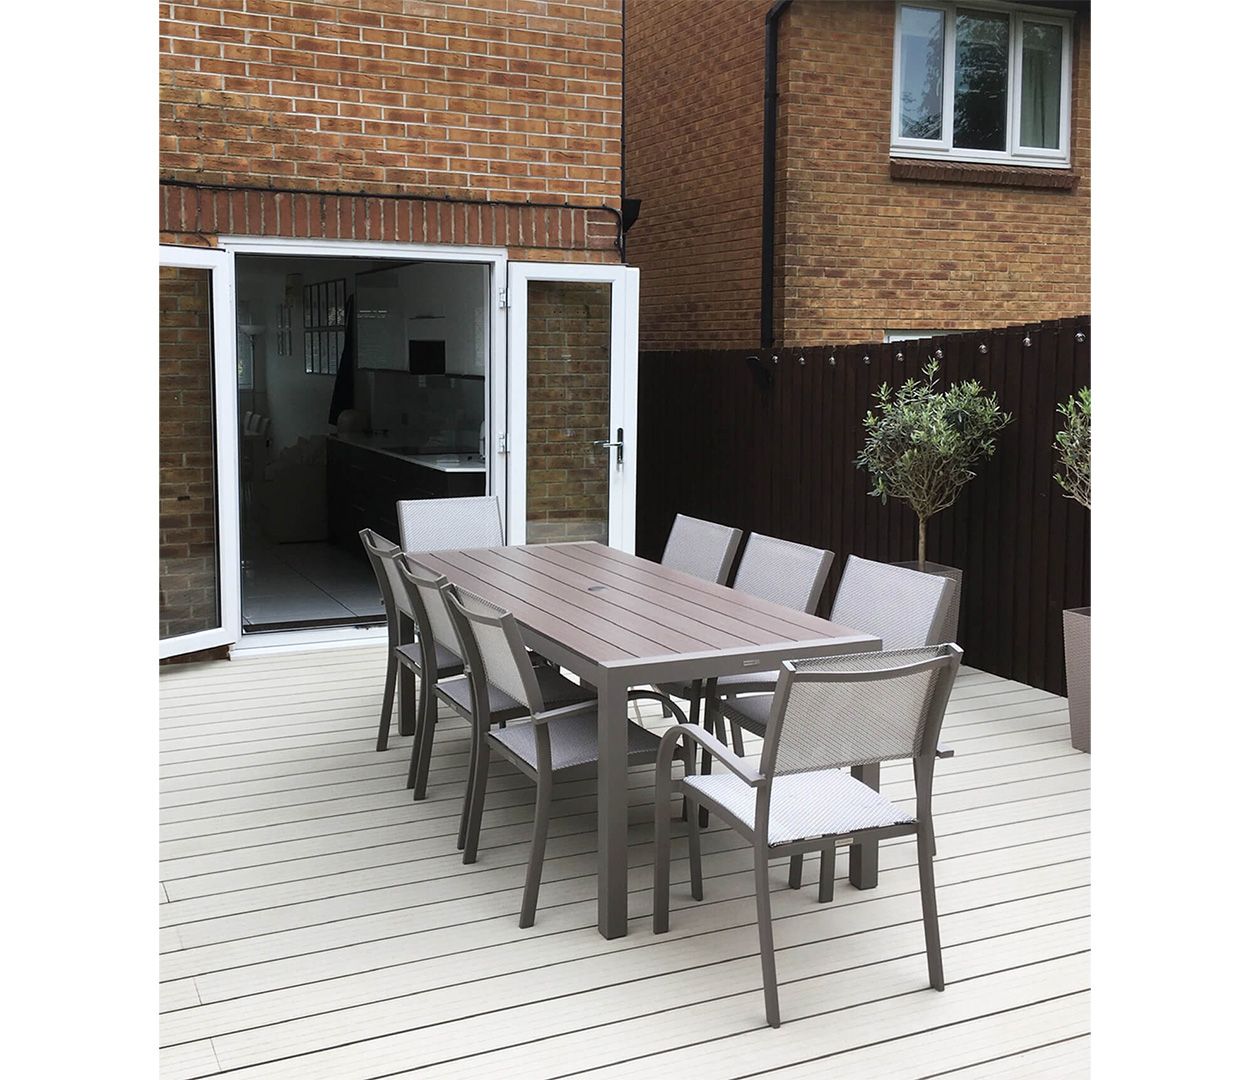 Cladco Composite Ivory Decking Boards bring a burst of brightness into this garden